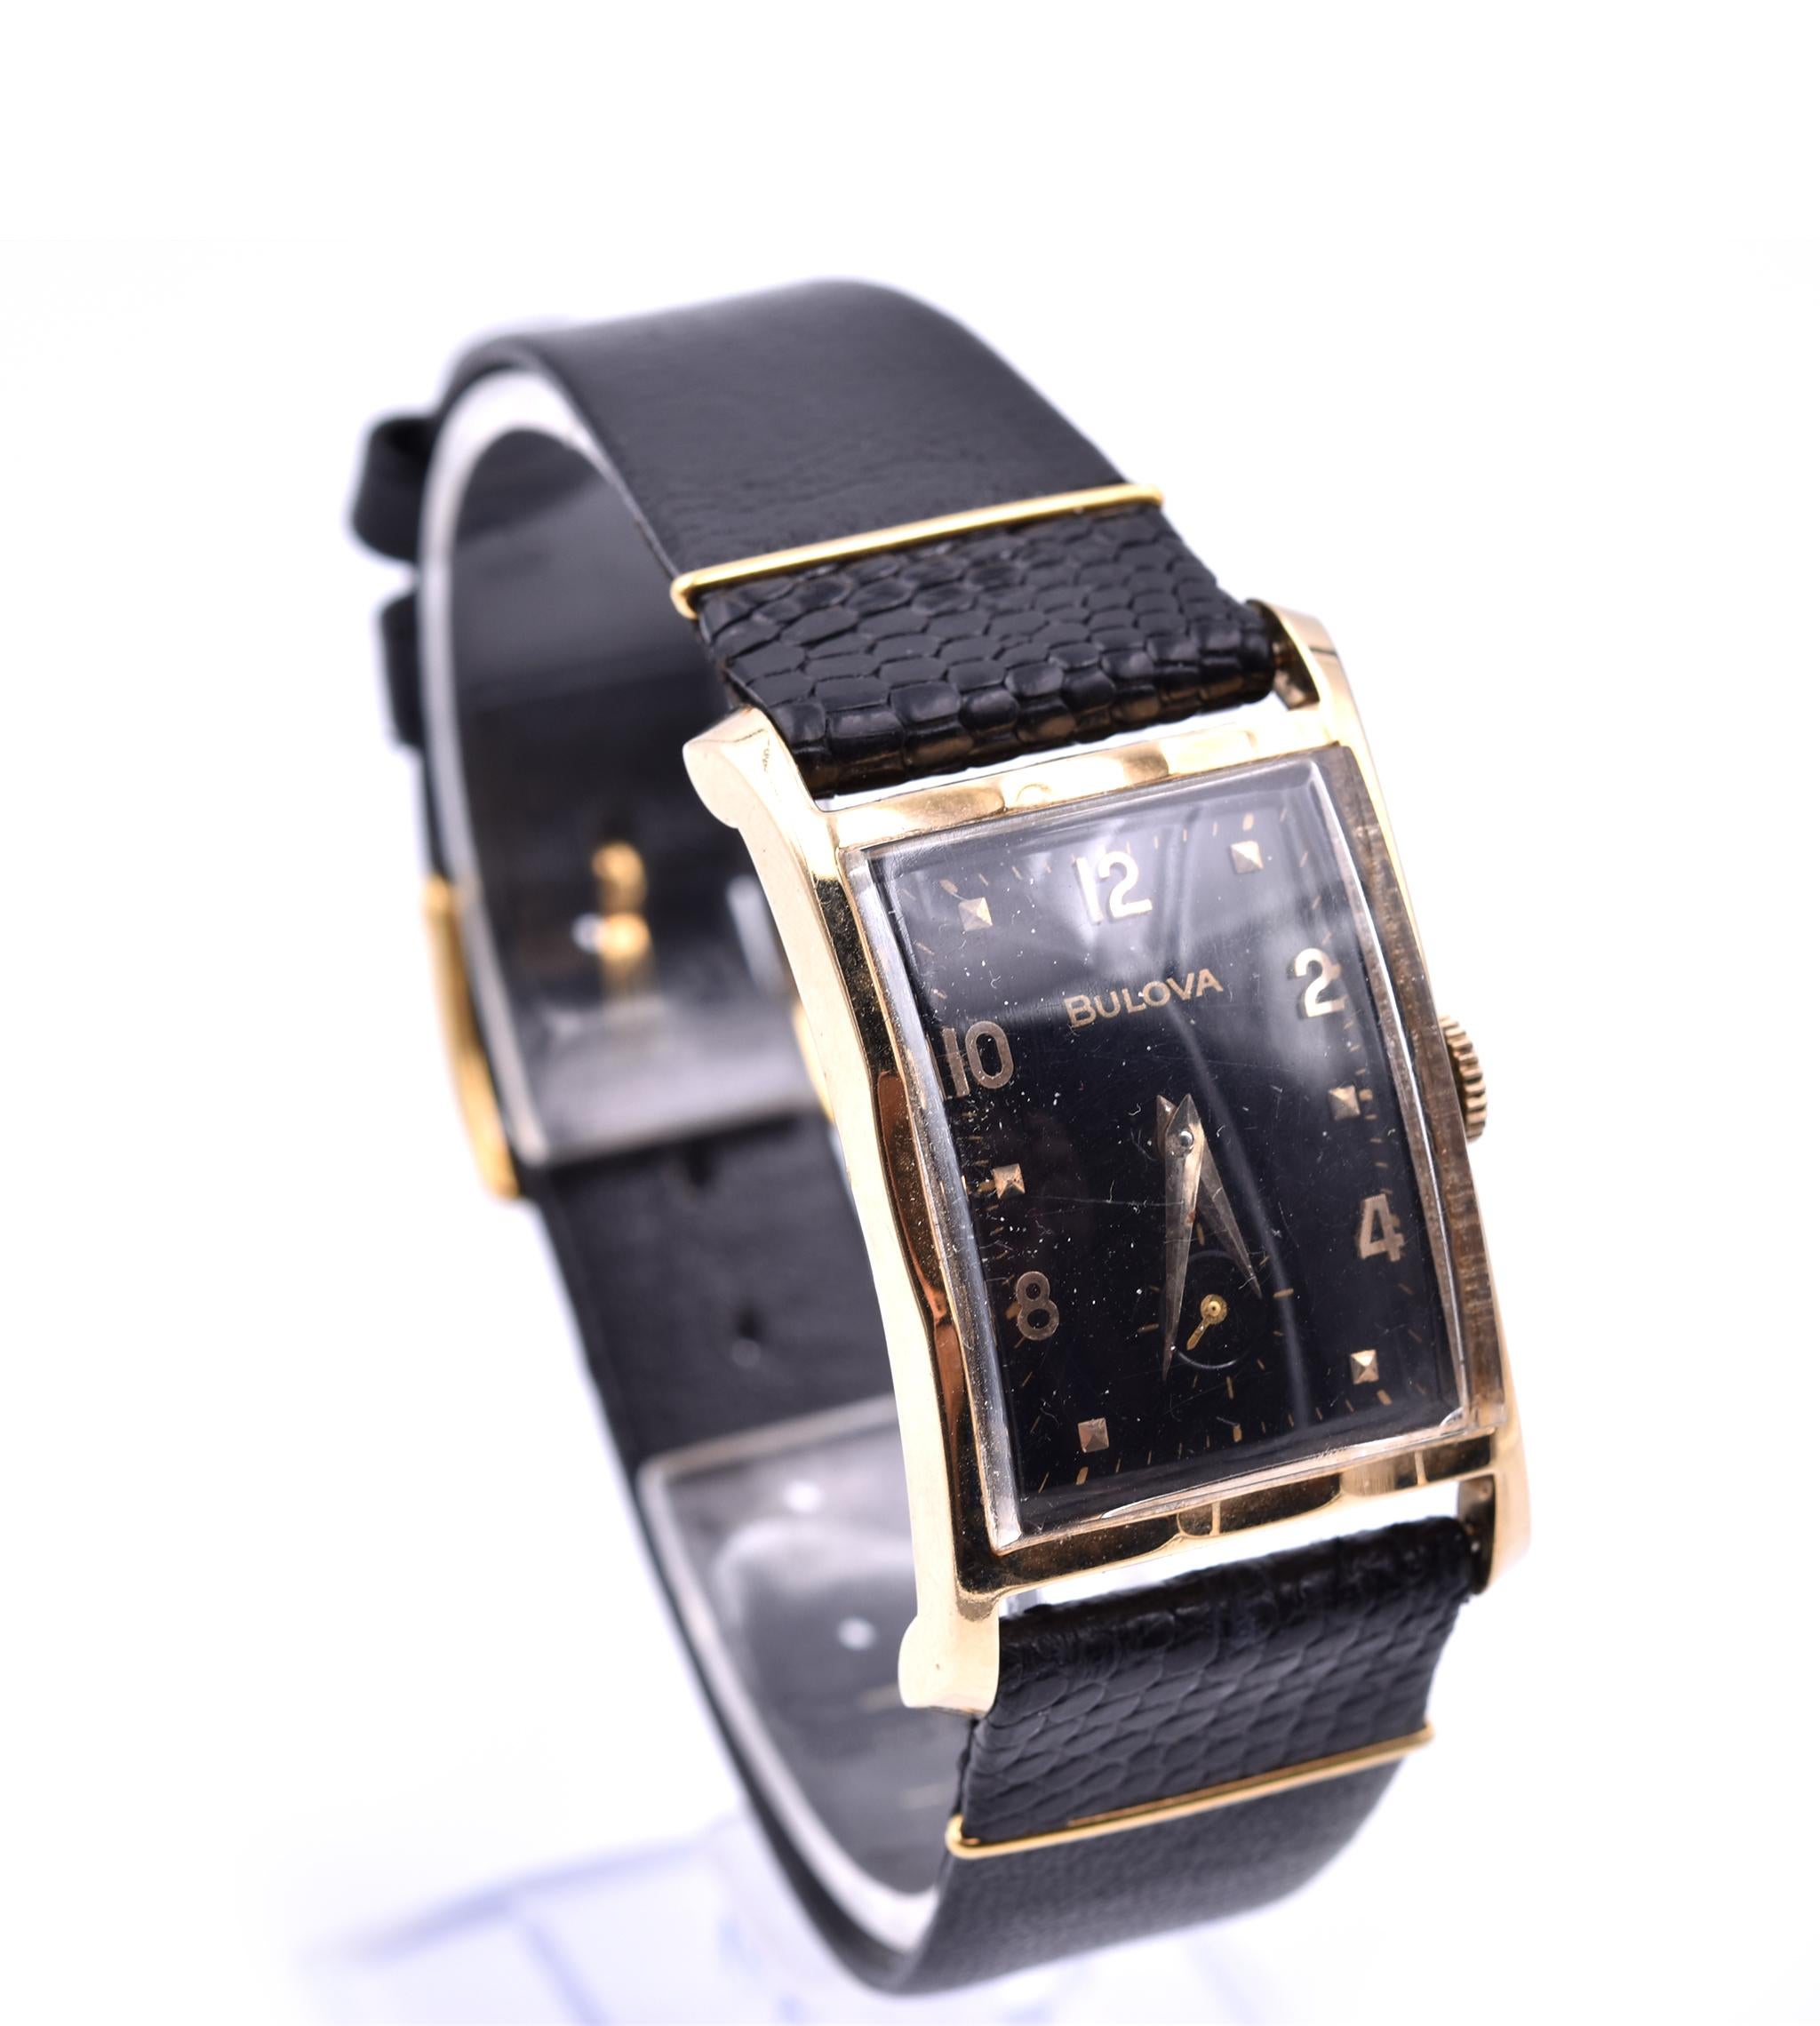 Movement: manual wind 17 jewels
Function: hours, minutes, sub-seconds
Case: rectangular 37mm x 24.5mm 14k yellow gold case, plastic crystal, pull/push crown, solid case back
Dial: black dial with alternating dot and arabic hour markers, gold sword